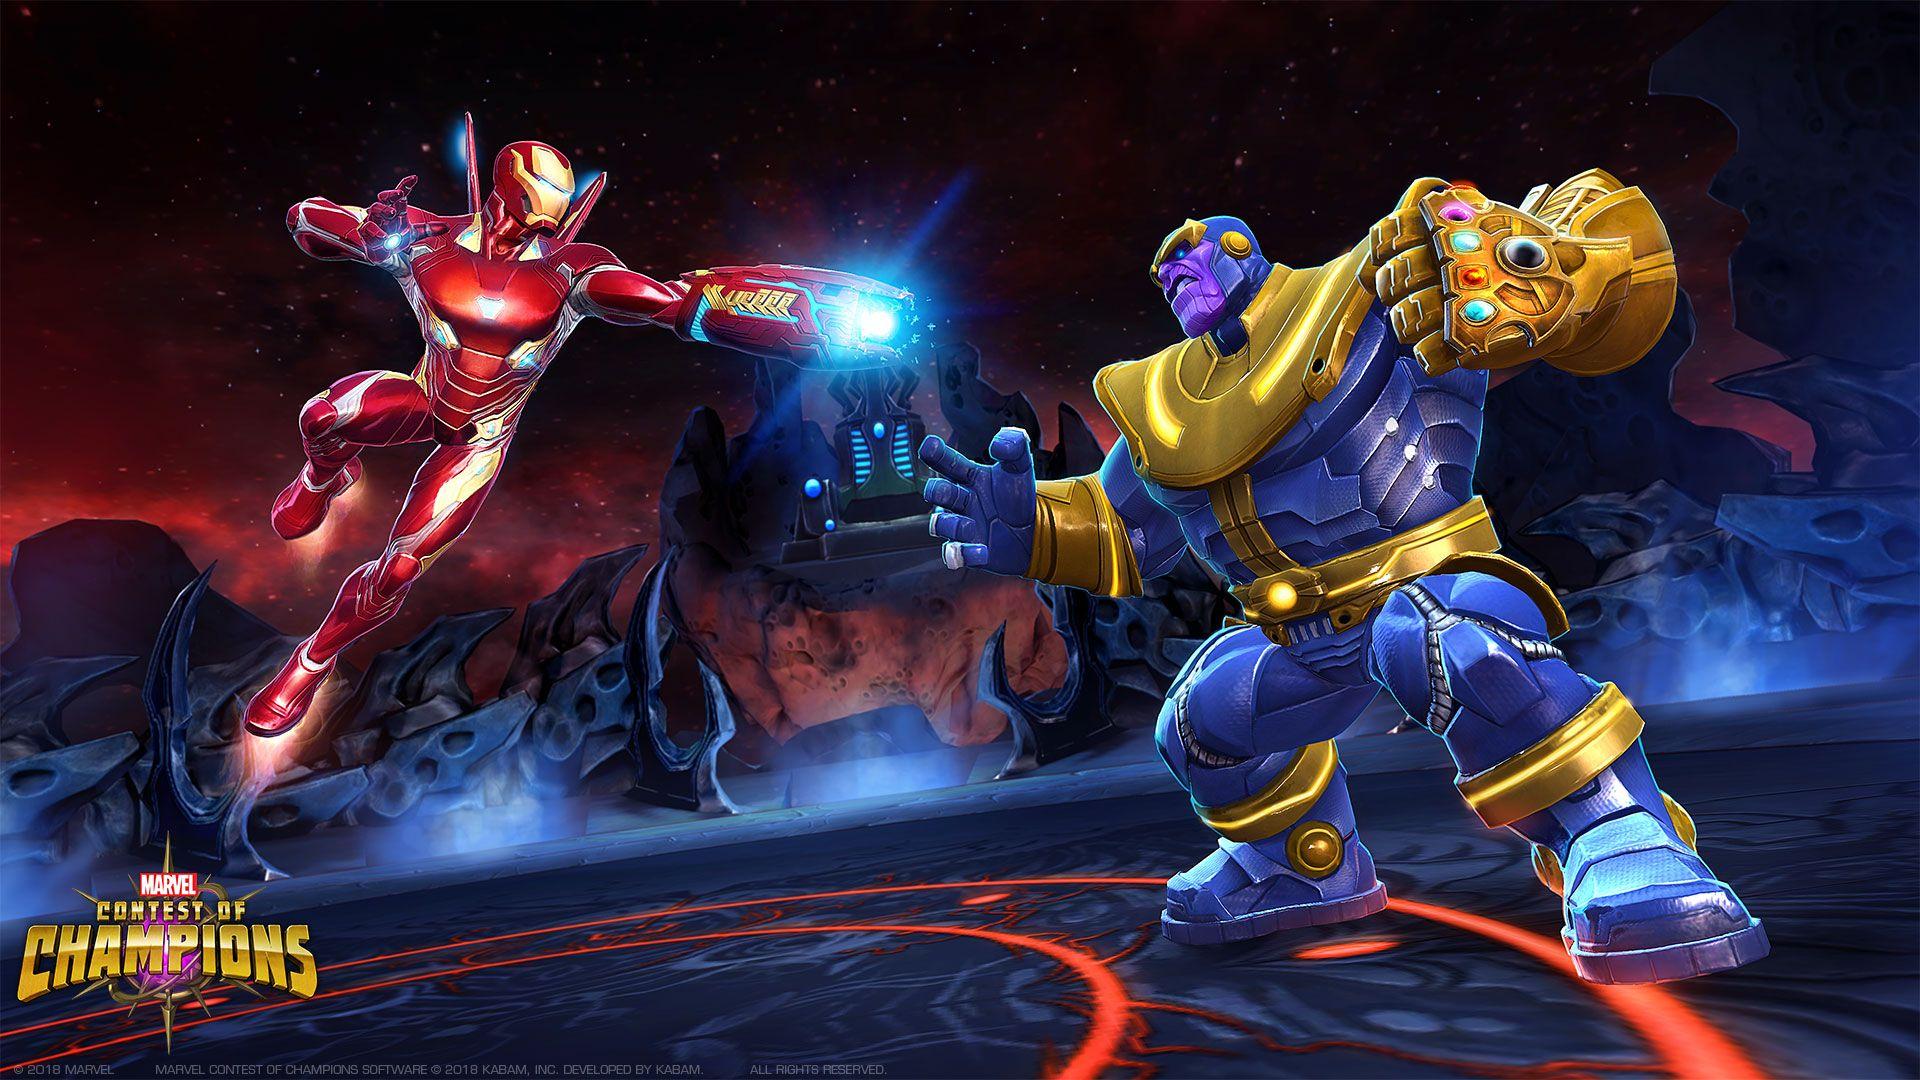 Infinity War': Why Mobile Game 'Contest of Champions' is Essential